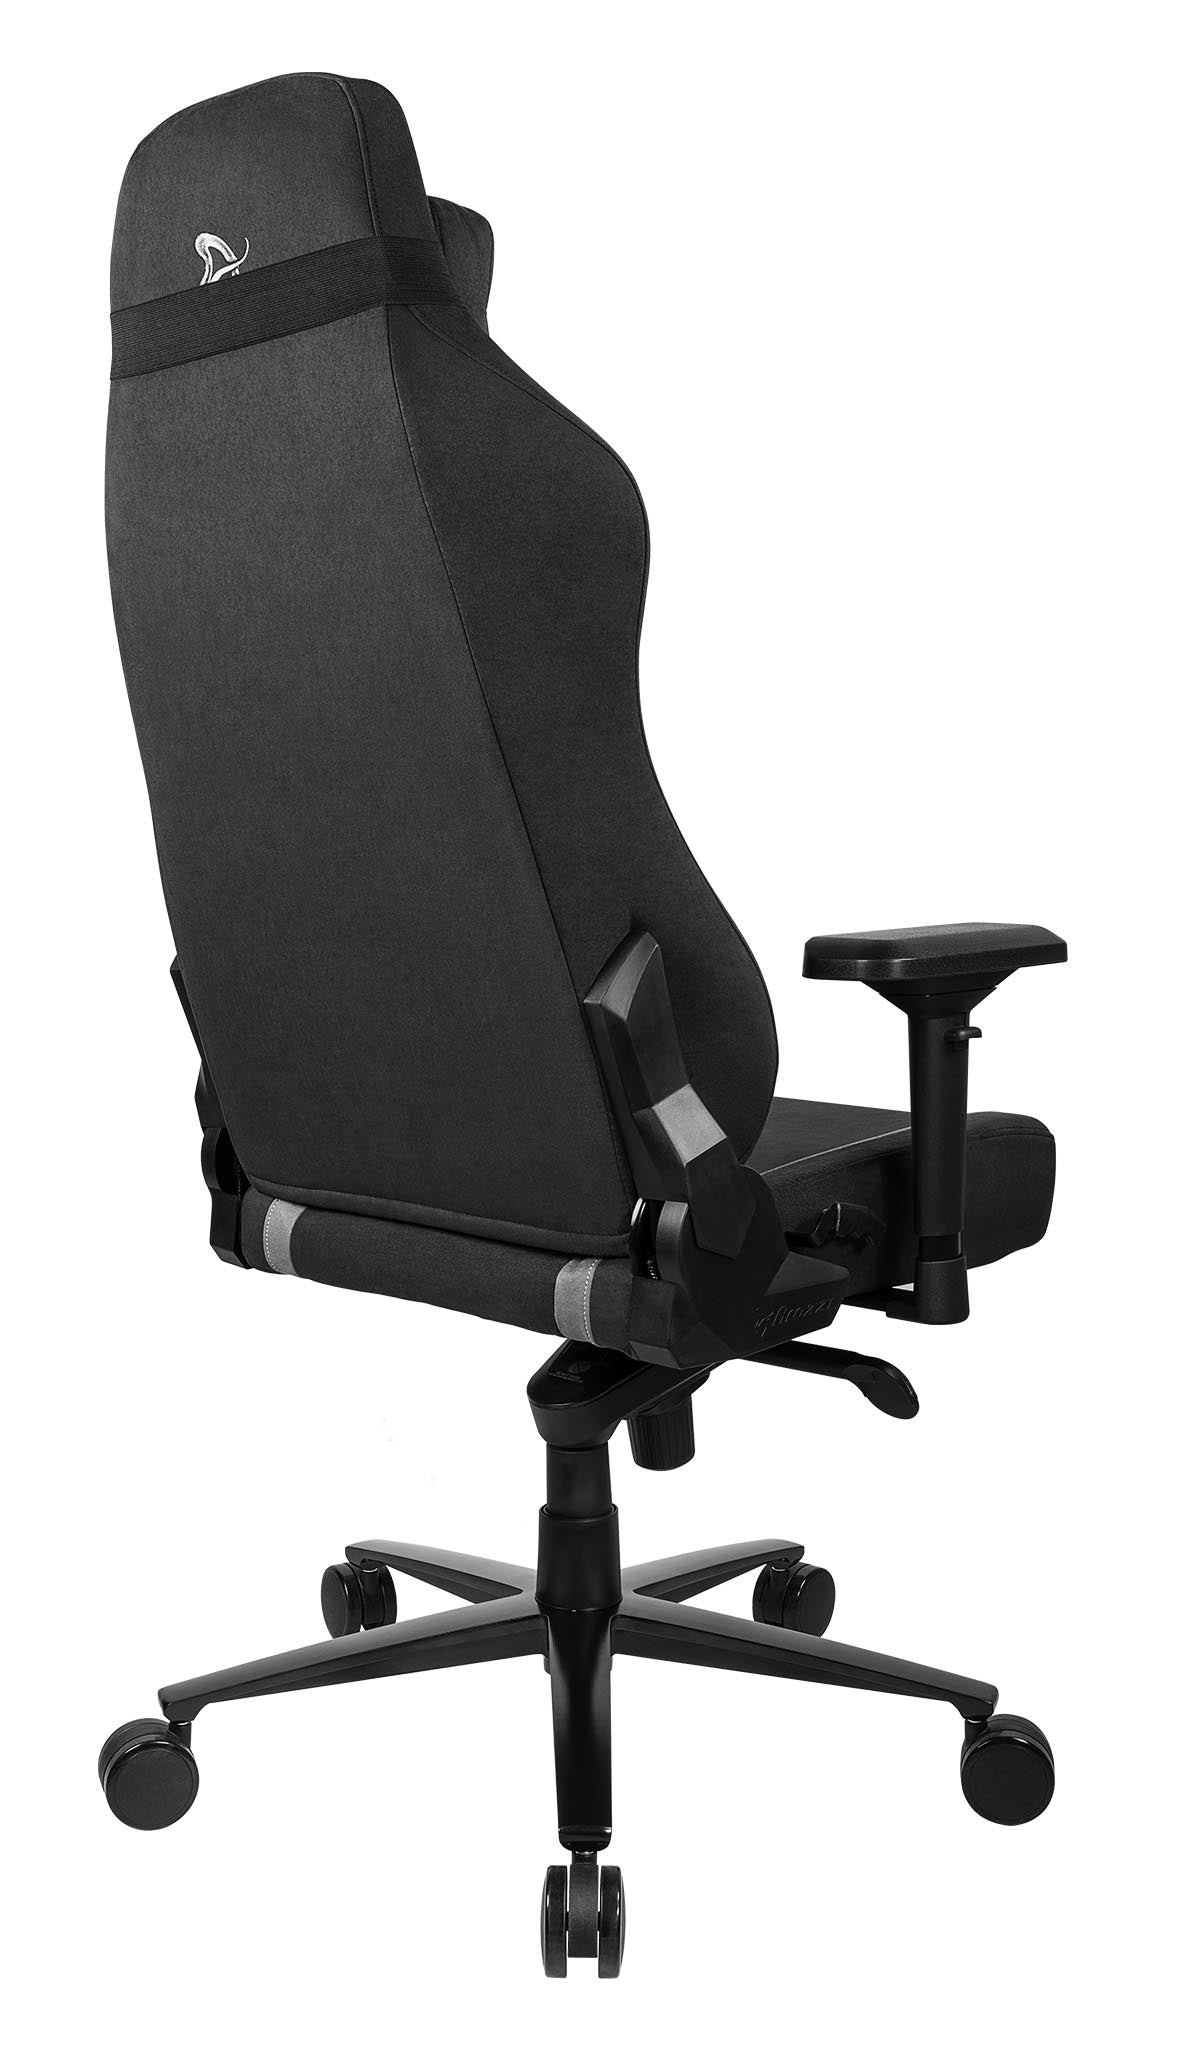 Arozzi Vernazza Supersoft™ Fabric - Black - Level UpArozziGaming Chair850032247238